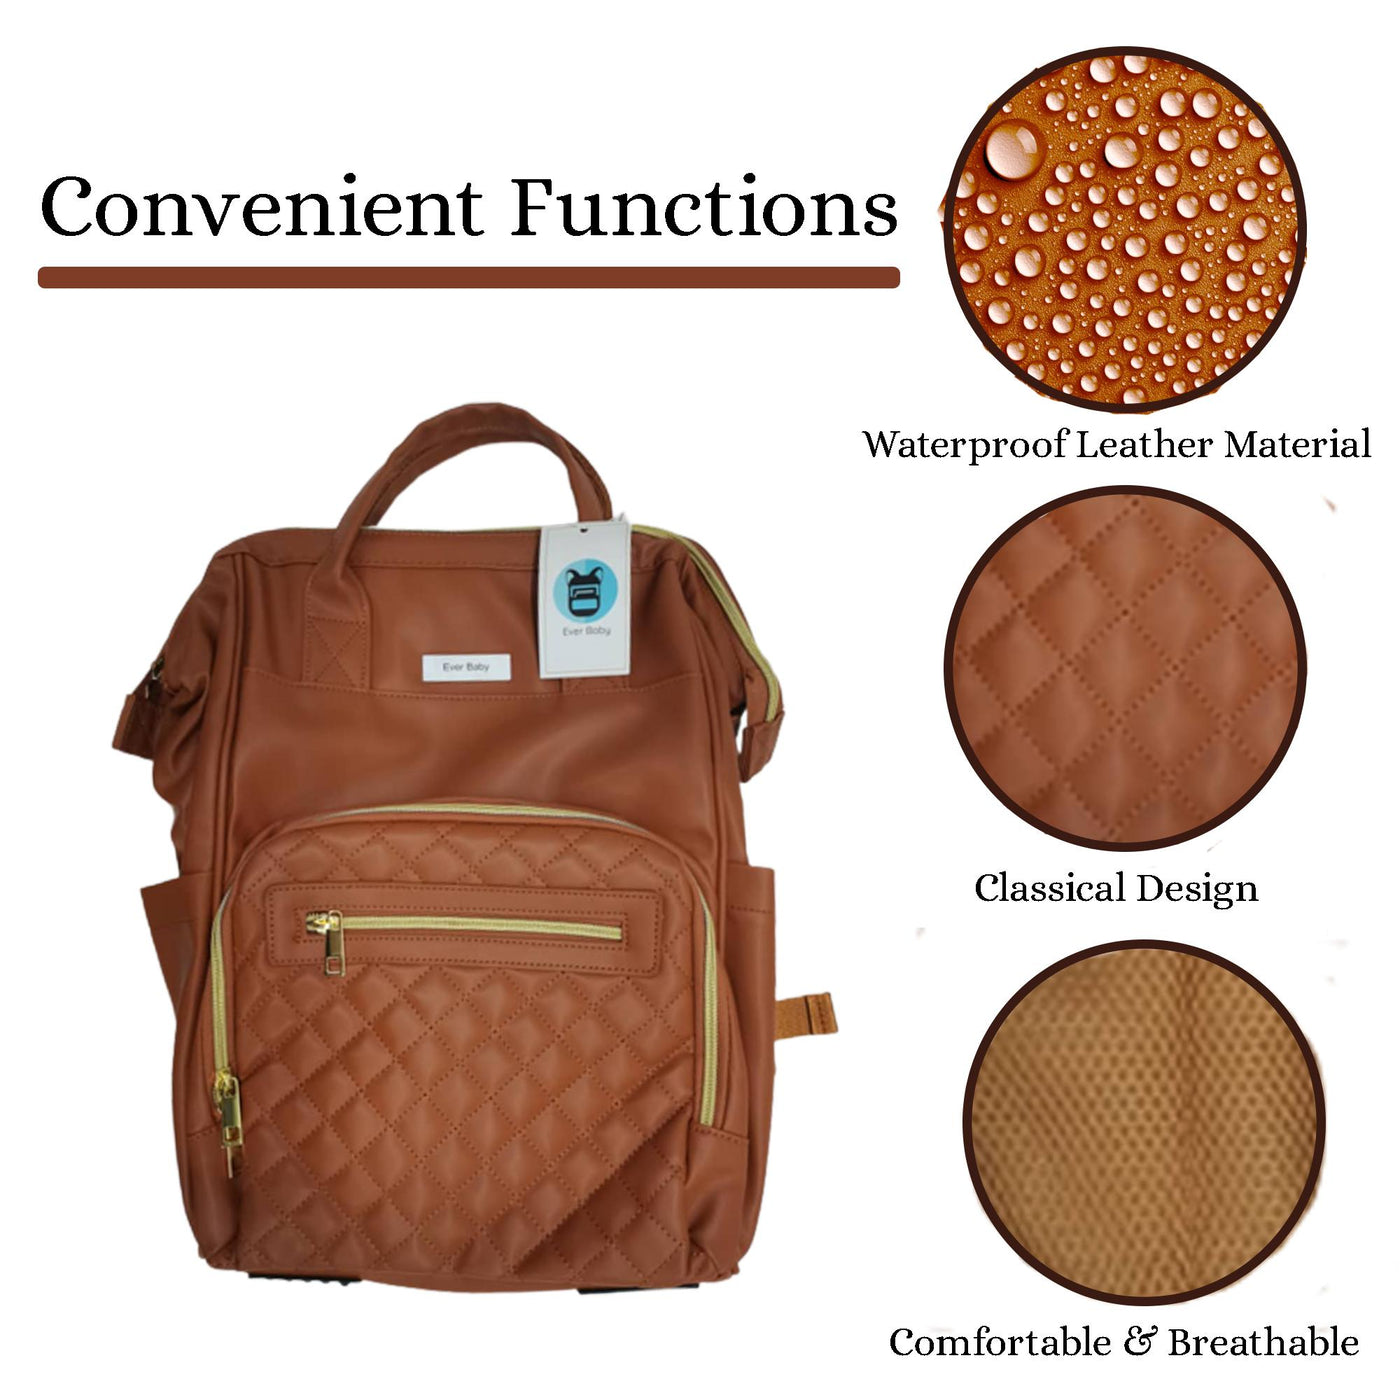 Ever Baby Premium Baby Bag Backpack, Stylish and Spacious Diaper Bag for Parents, Multi Functional Baby Bag Backpack, Insulated and Multiple Pockets and More Saving Capacity. (COLOR : BROWN)